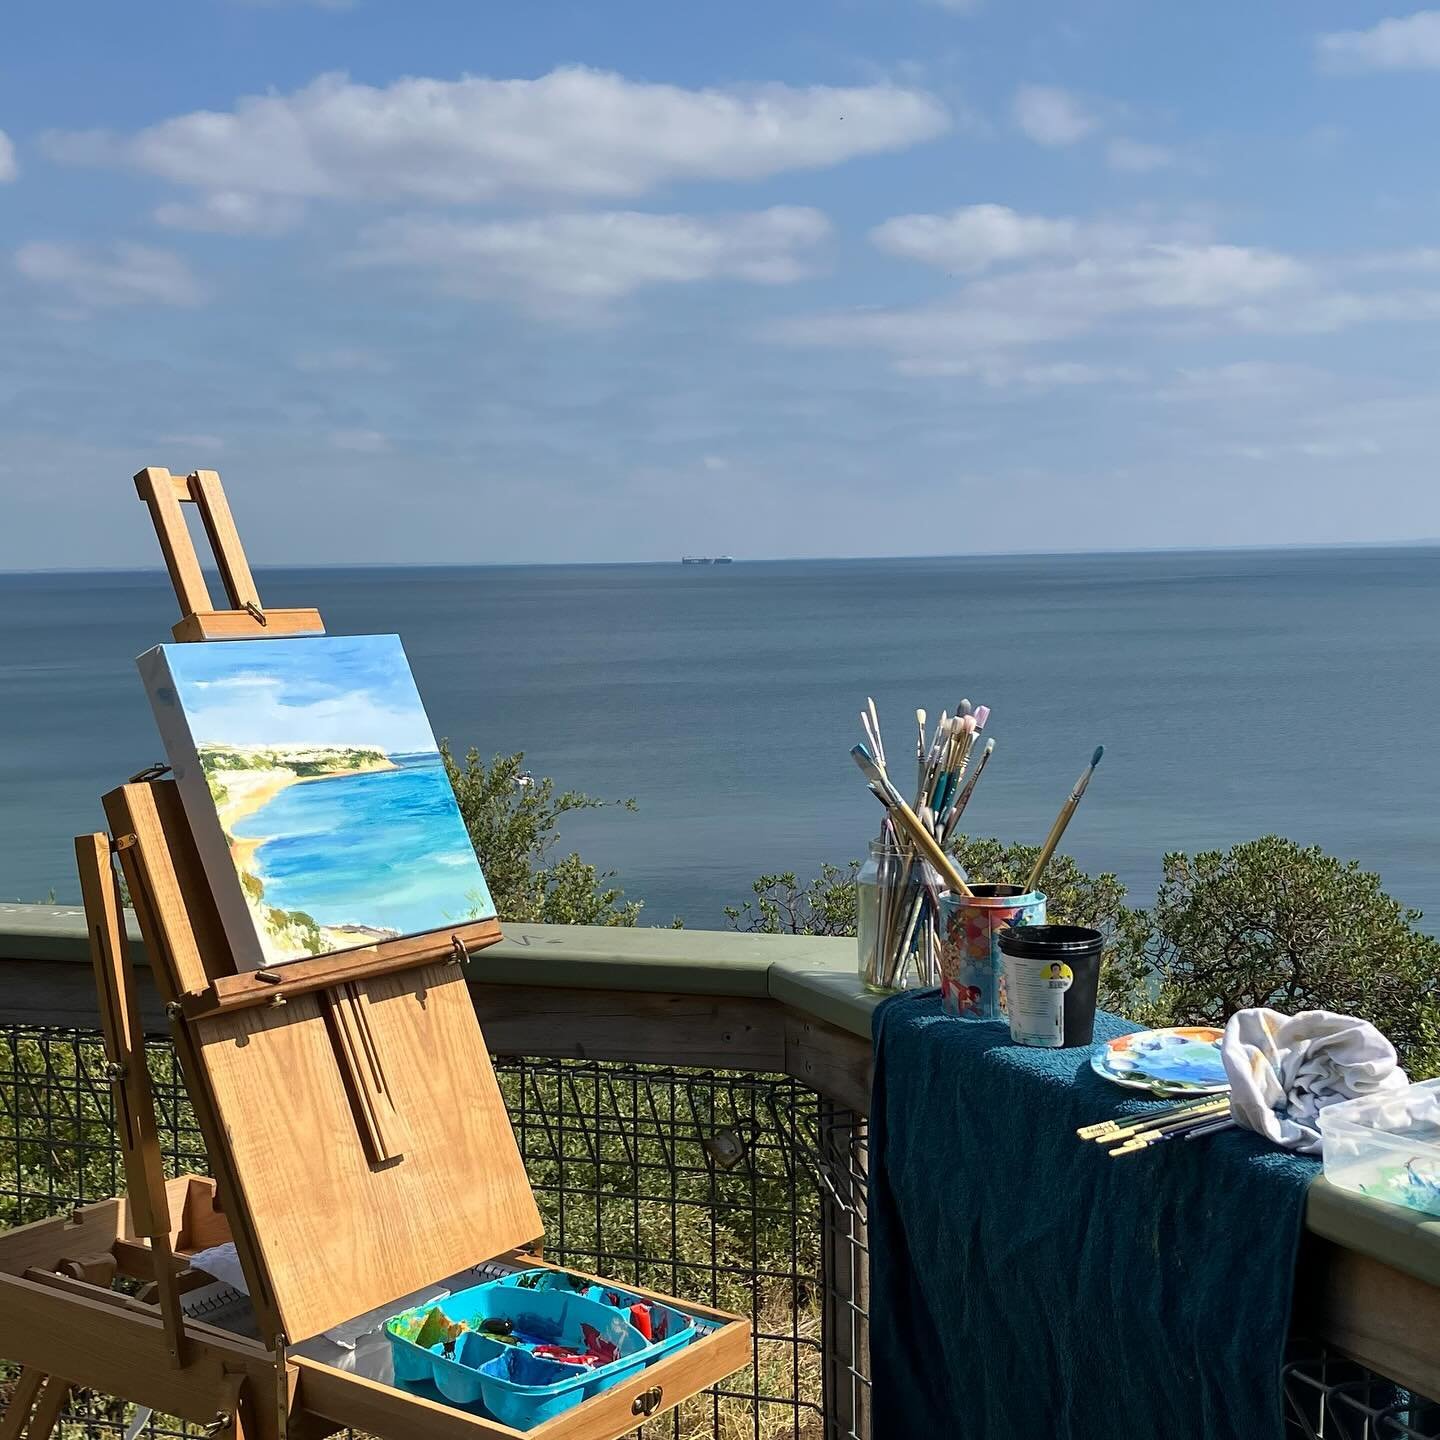 My other artistic side en plein air oil painting. Perfect day yesterday for this first sitting of view to Mount Martha Beach from Bird Rock Beach.  Follow my oil paintings @jillmcfarlaneart #colourmeadow #jillmcfarlaneart #enpleinairpainting #oilpain